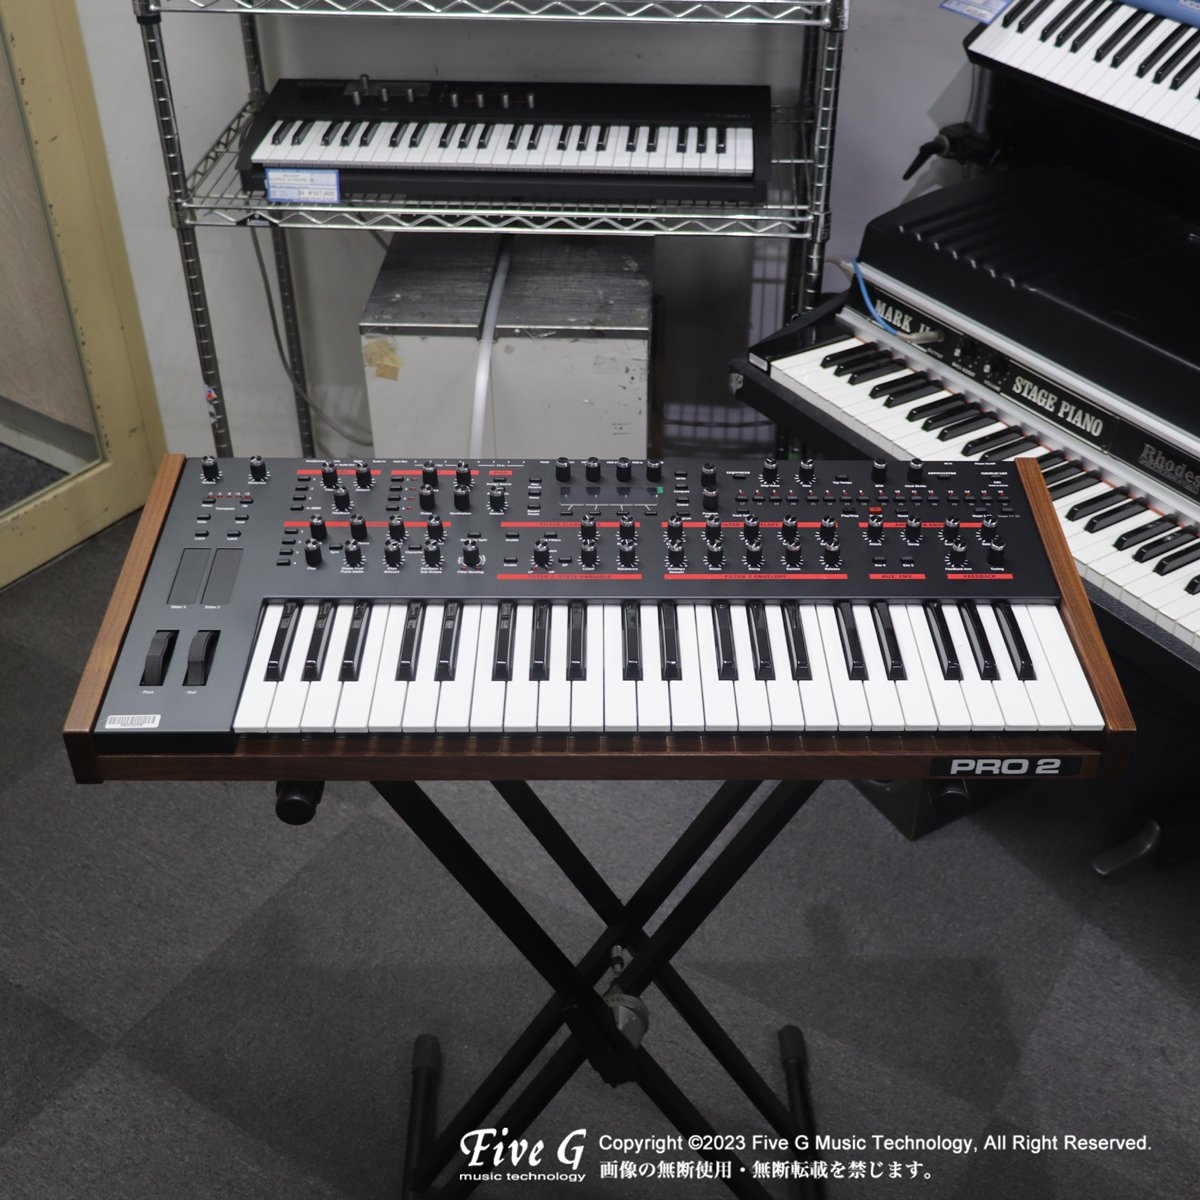 Dave Smith Instruments PRO 中古 Used シンセサイザー キーボード Five G music  technology